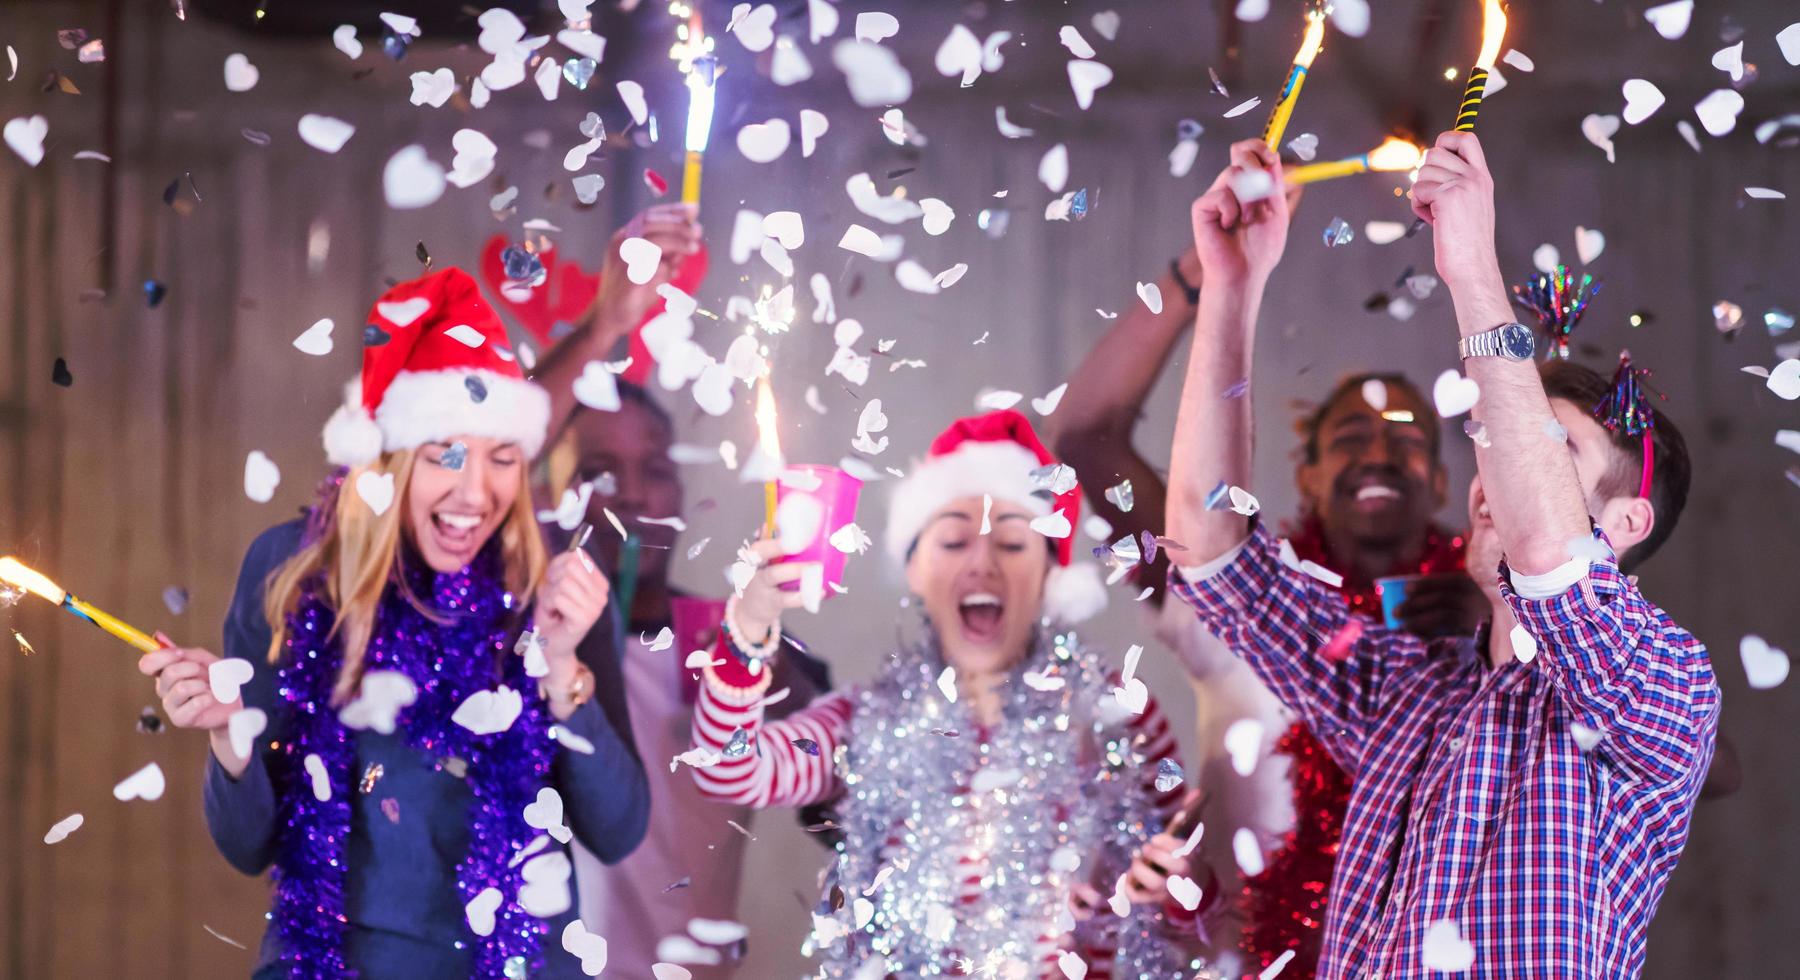 multiethnic group of casual business people having confetti party photo